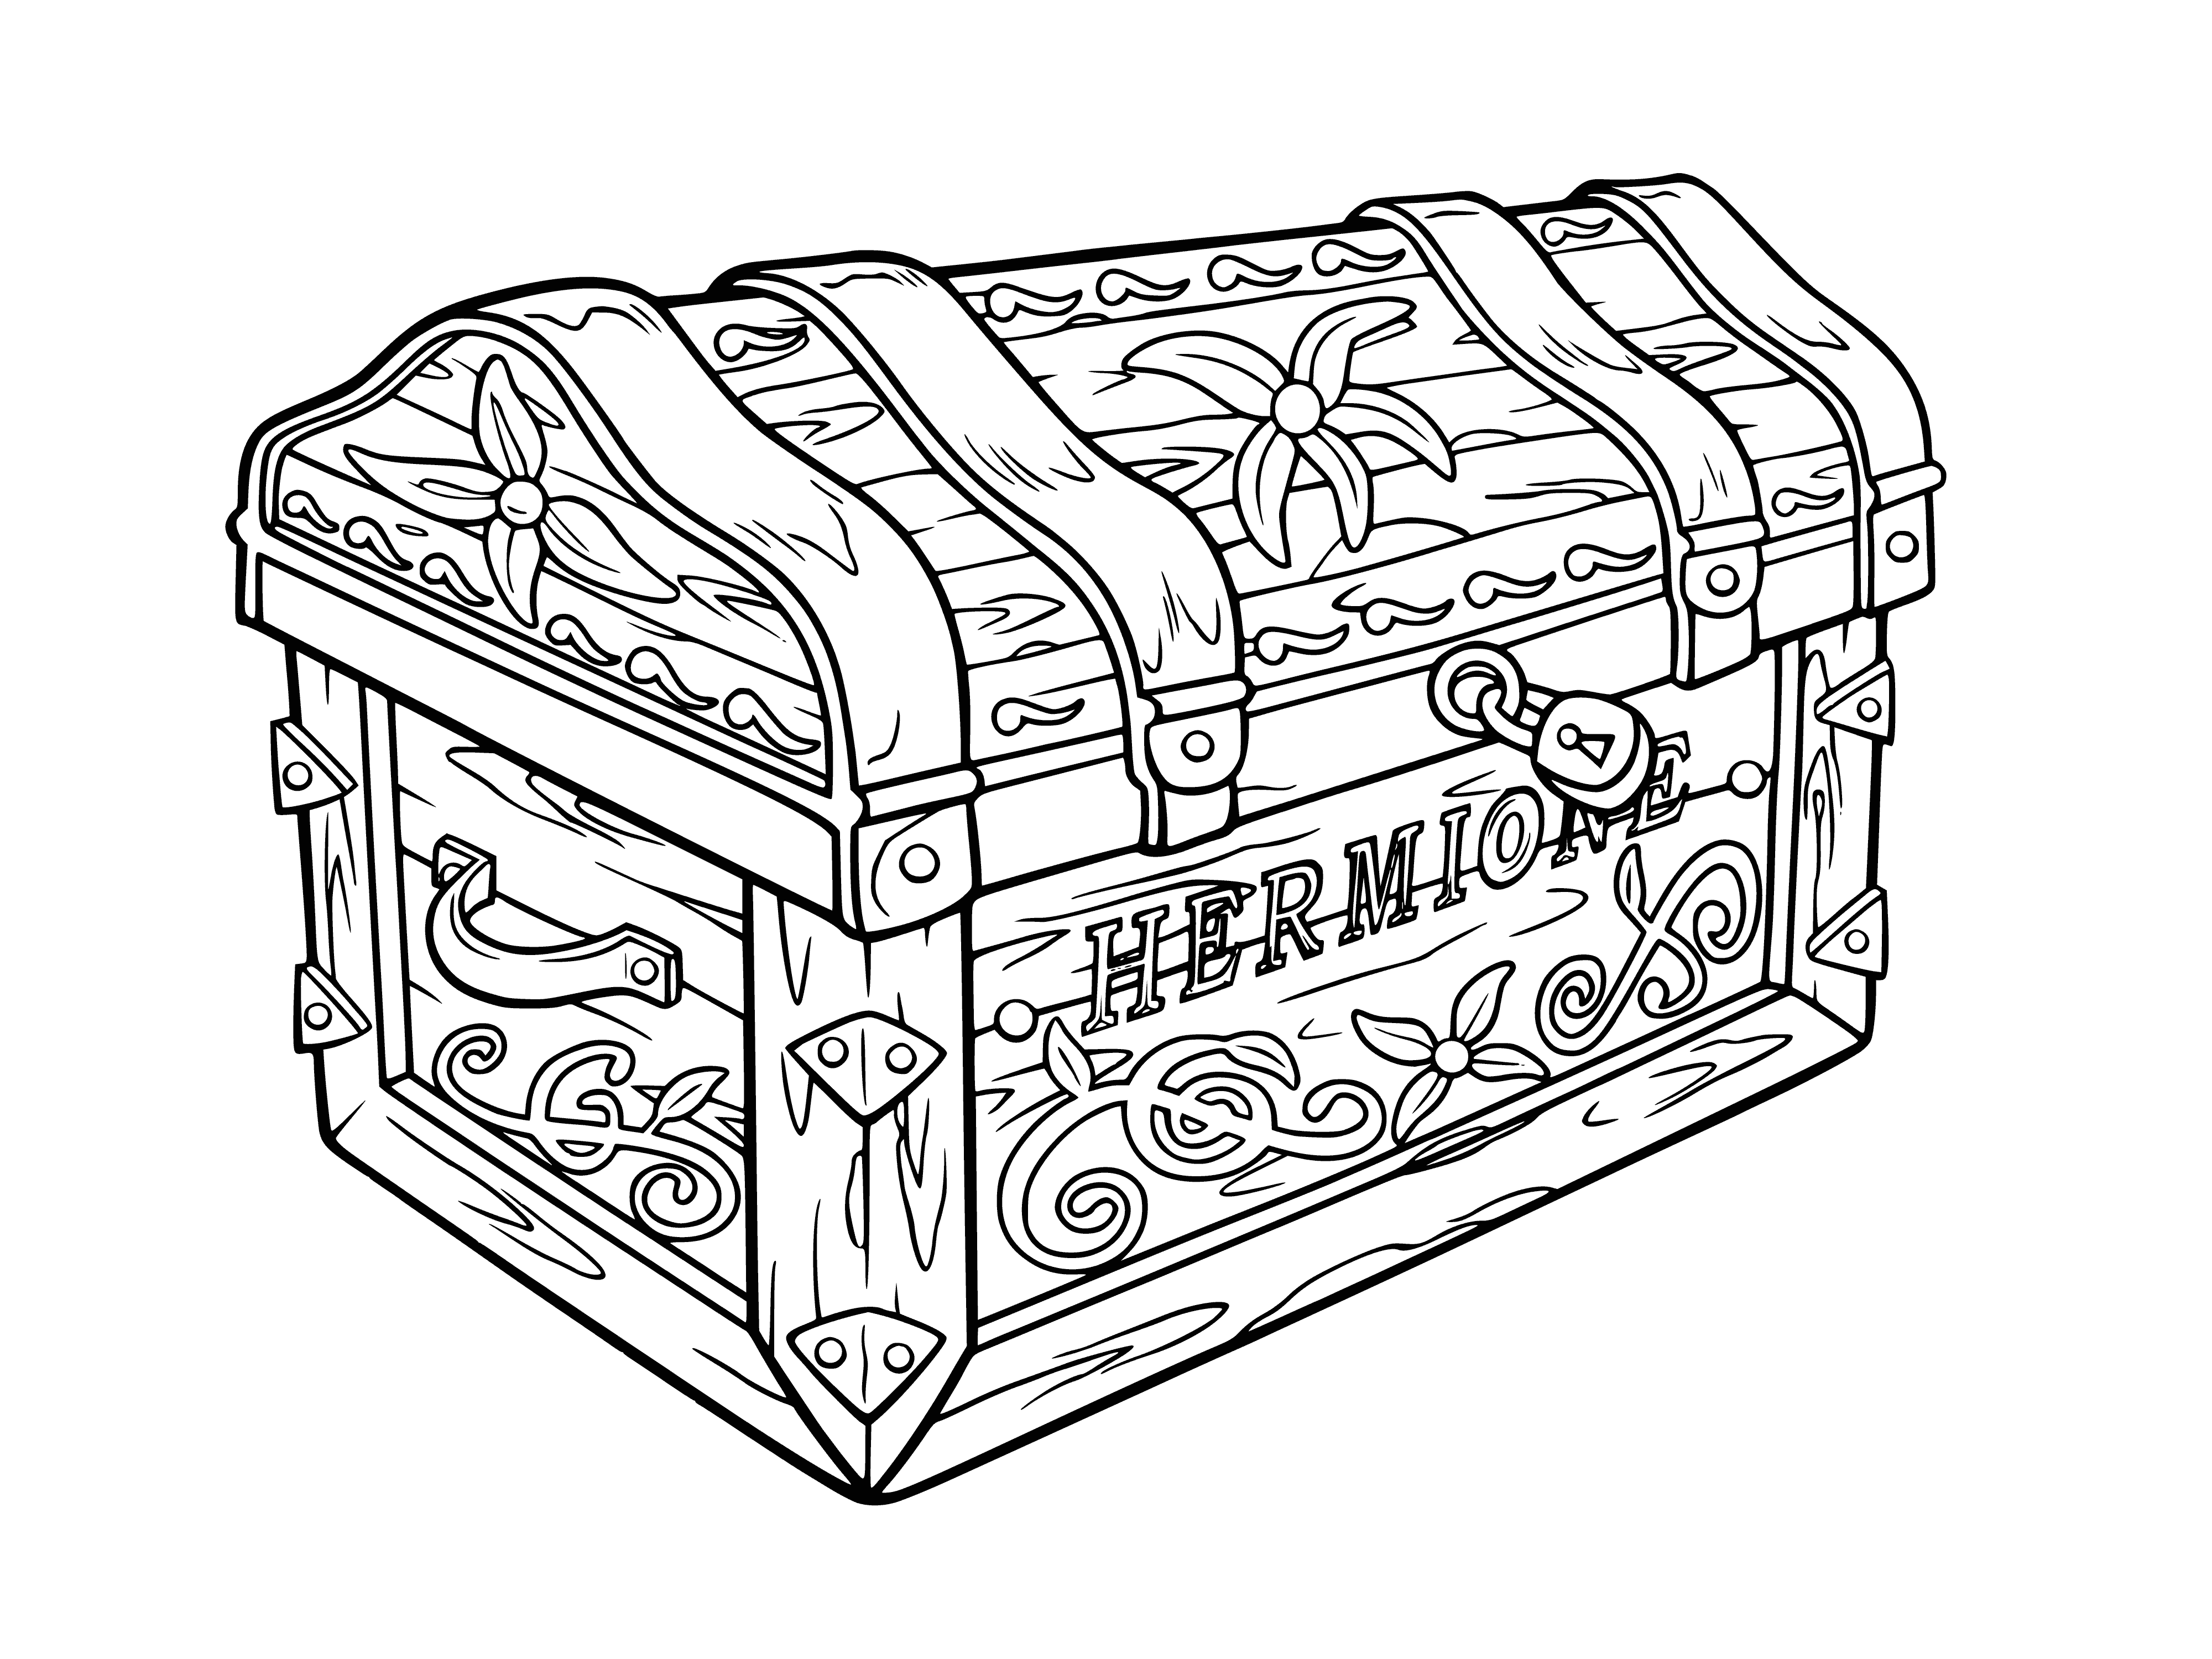 Hermione's Chest coloring page